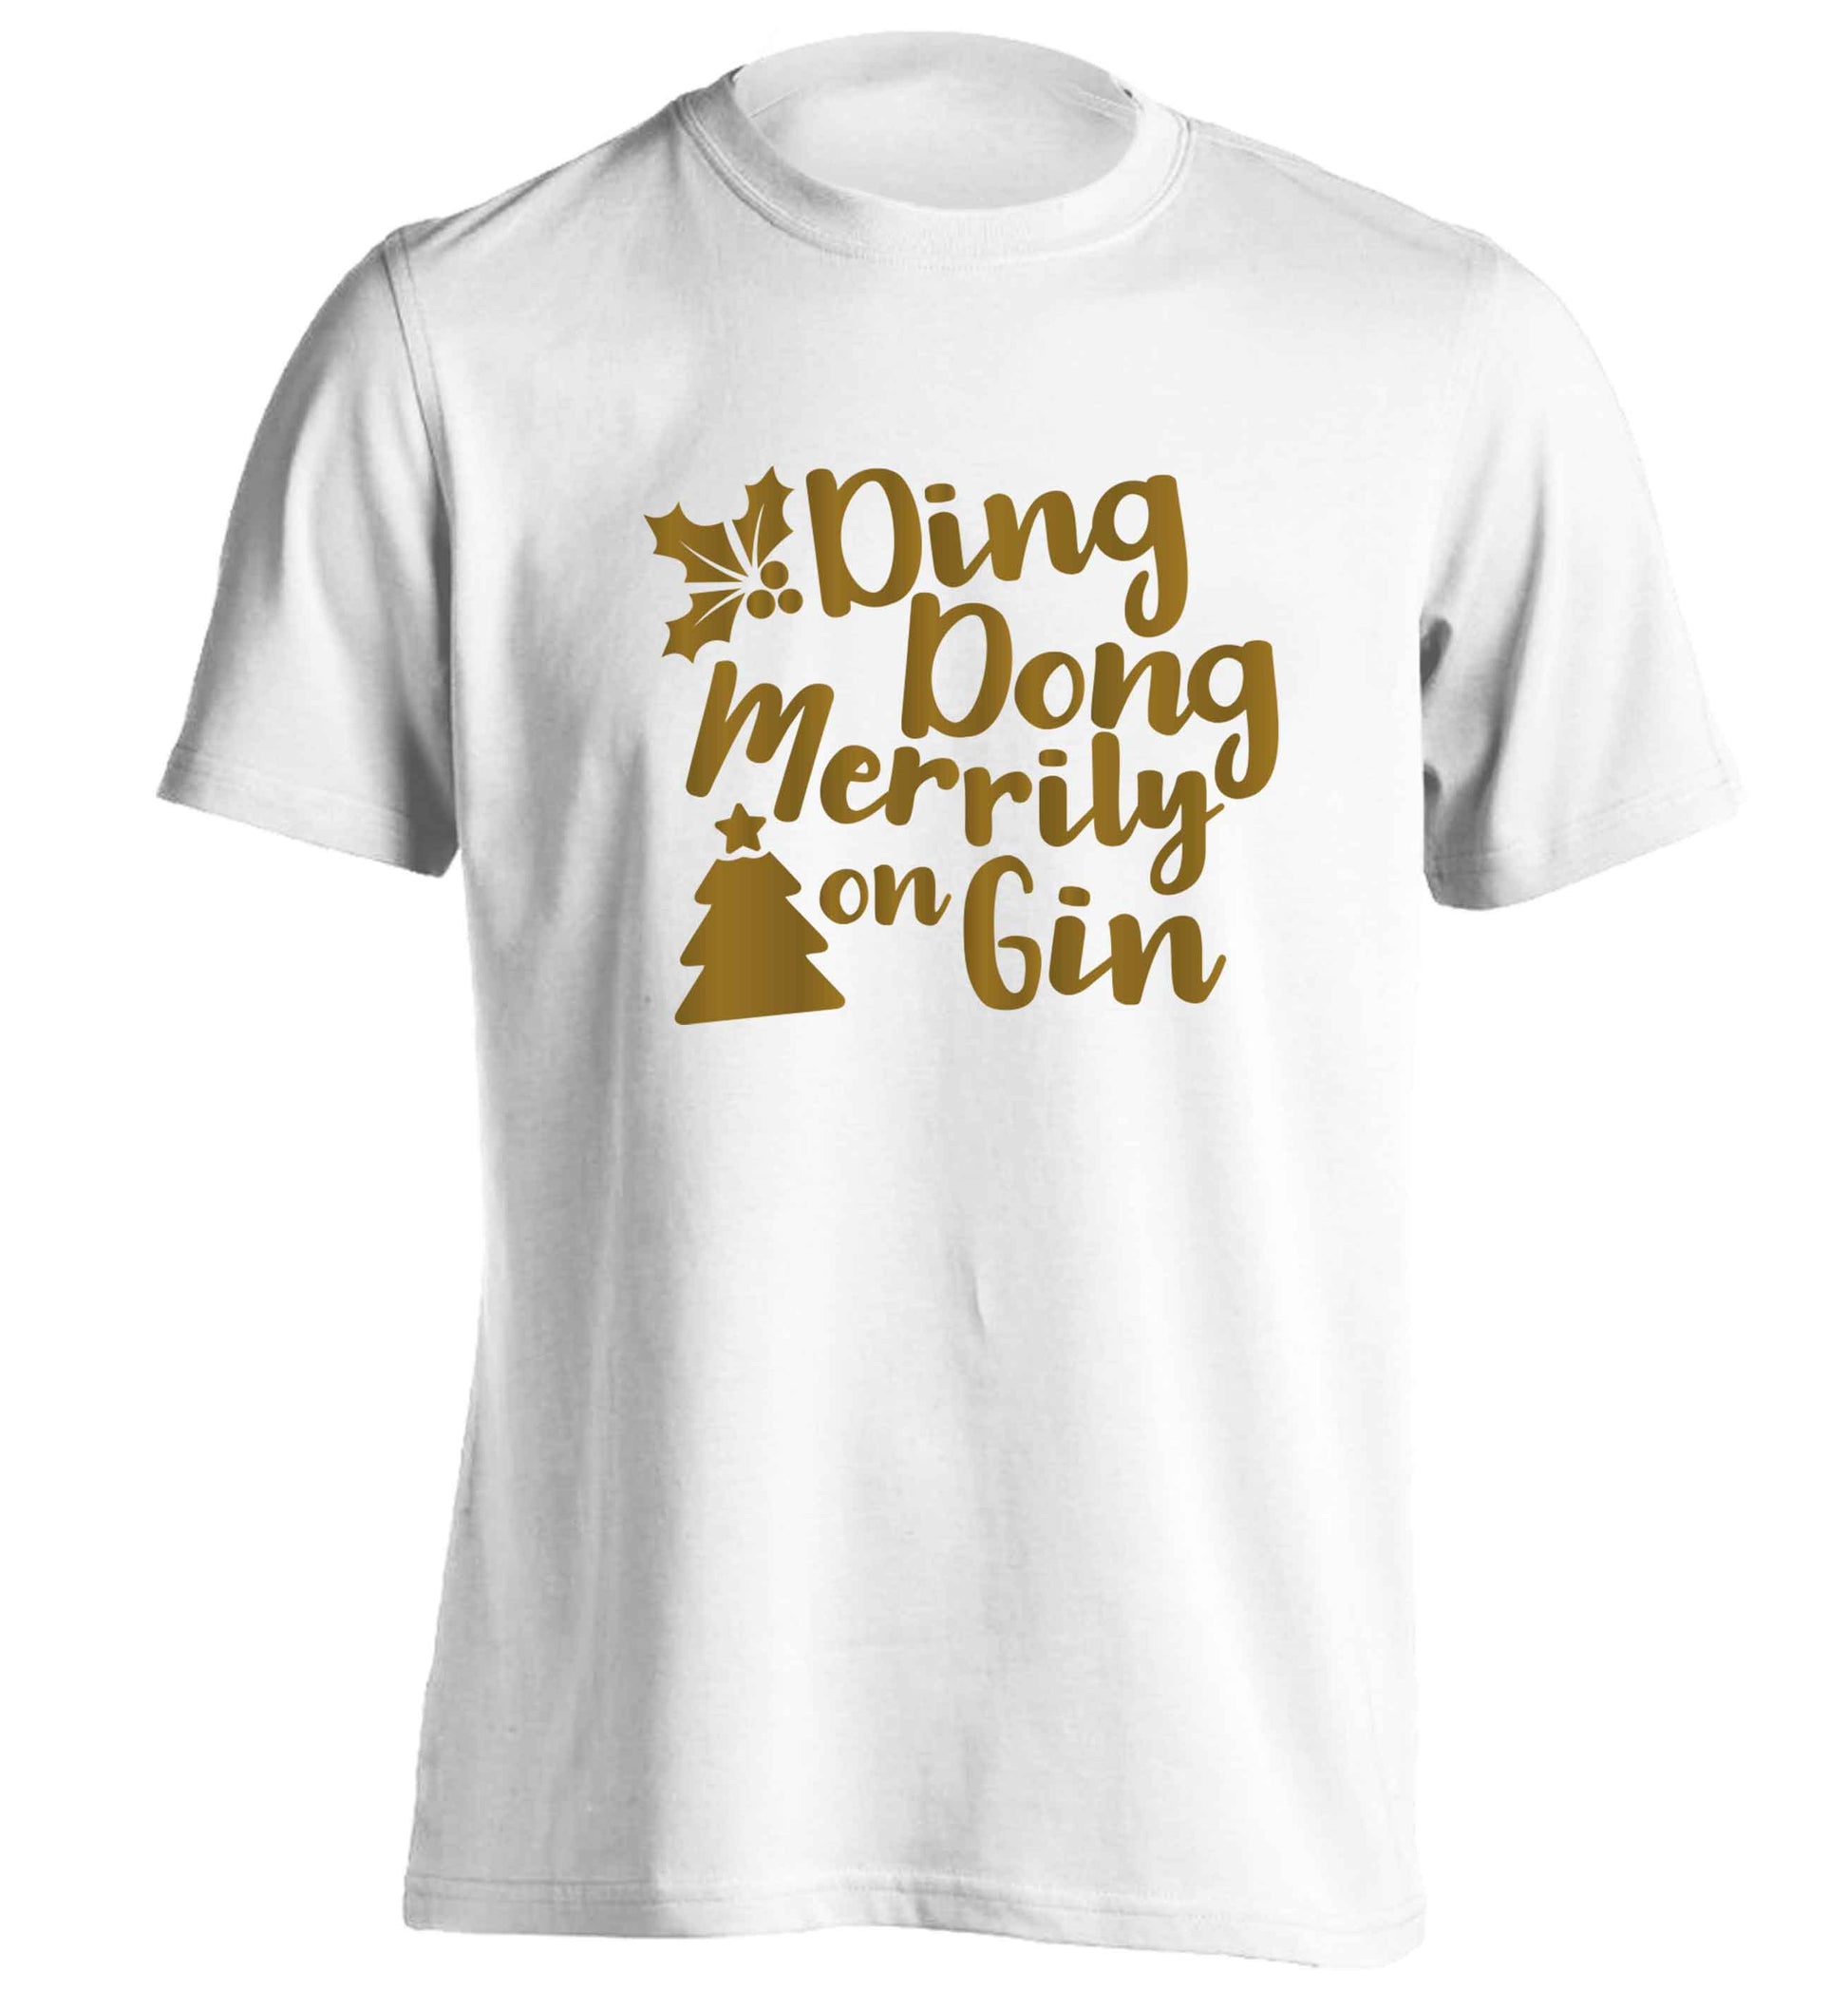 Ding dong merrily on gin adults unisex white Tshirt 2XL